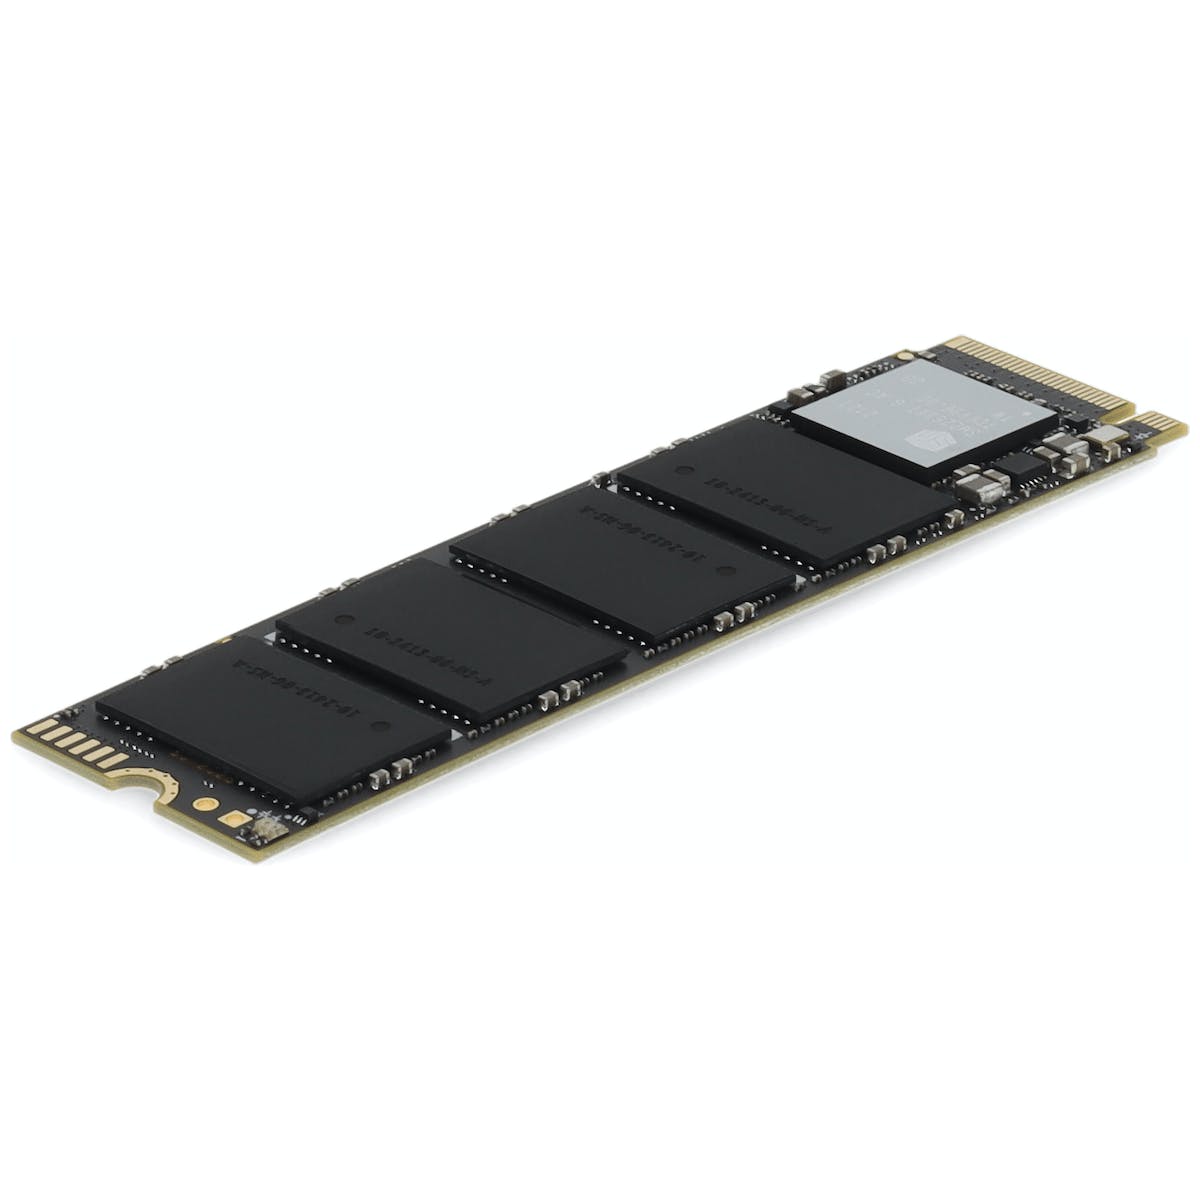 Picture of Addon ADD-SSDHL256GB-D8 256GB M.2 2280 PCIe Gen 3 x4 NVMe 1.3 Solid State Drive